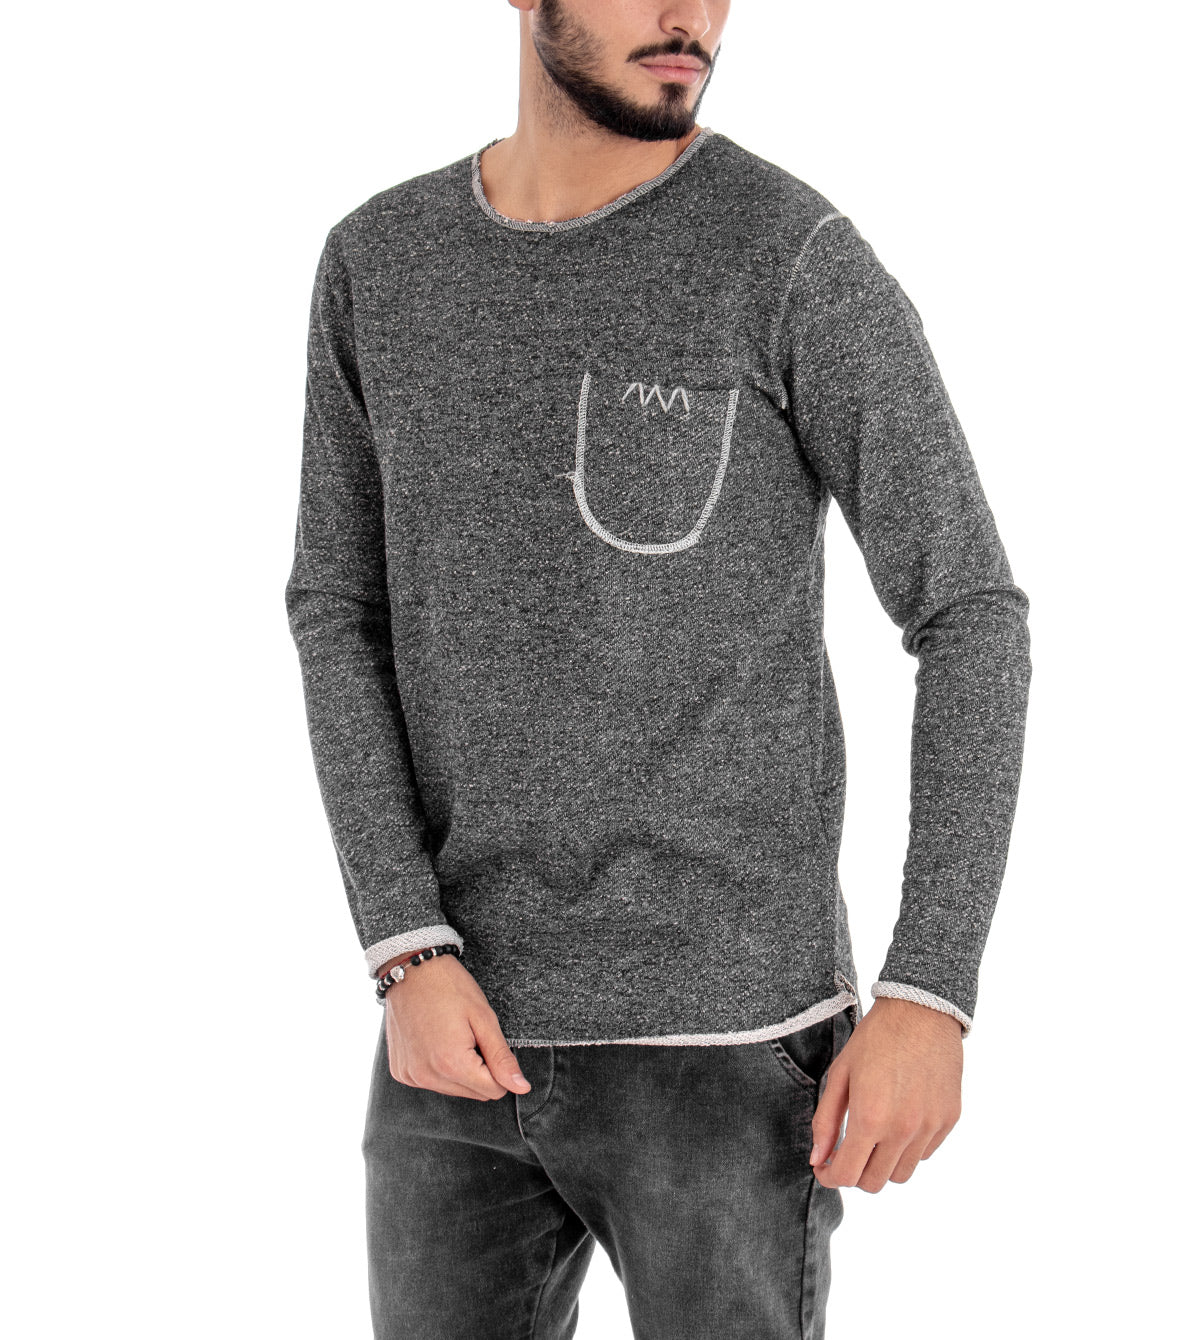 Men's Sweater Round Neck Stitching Pocket Solid Color Light Gray Casual GIOSAL